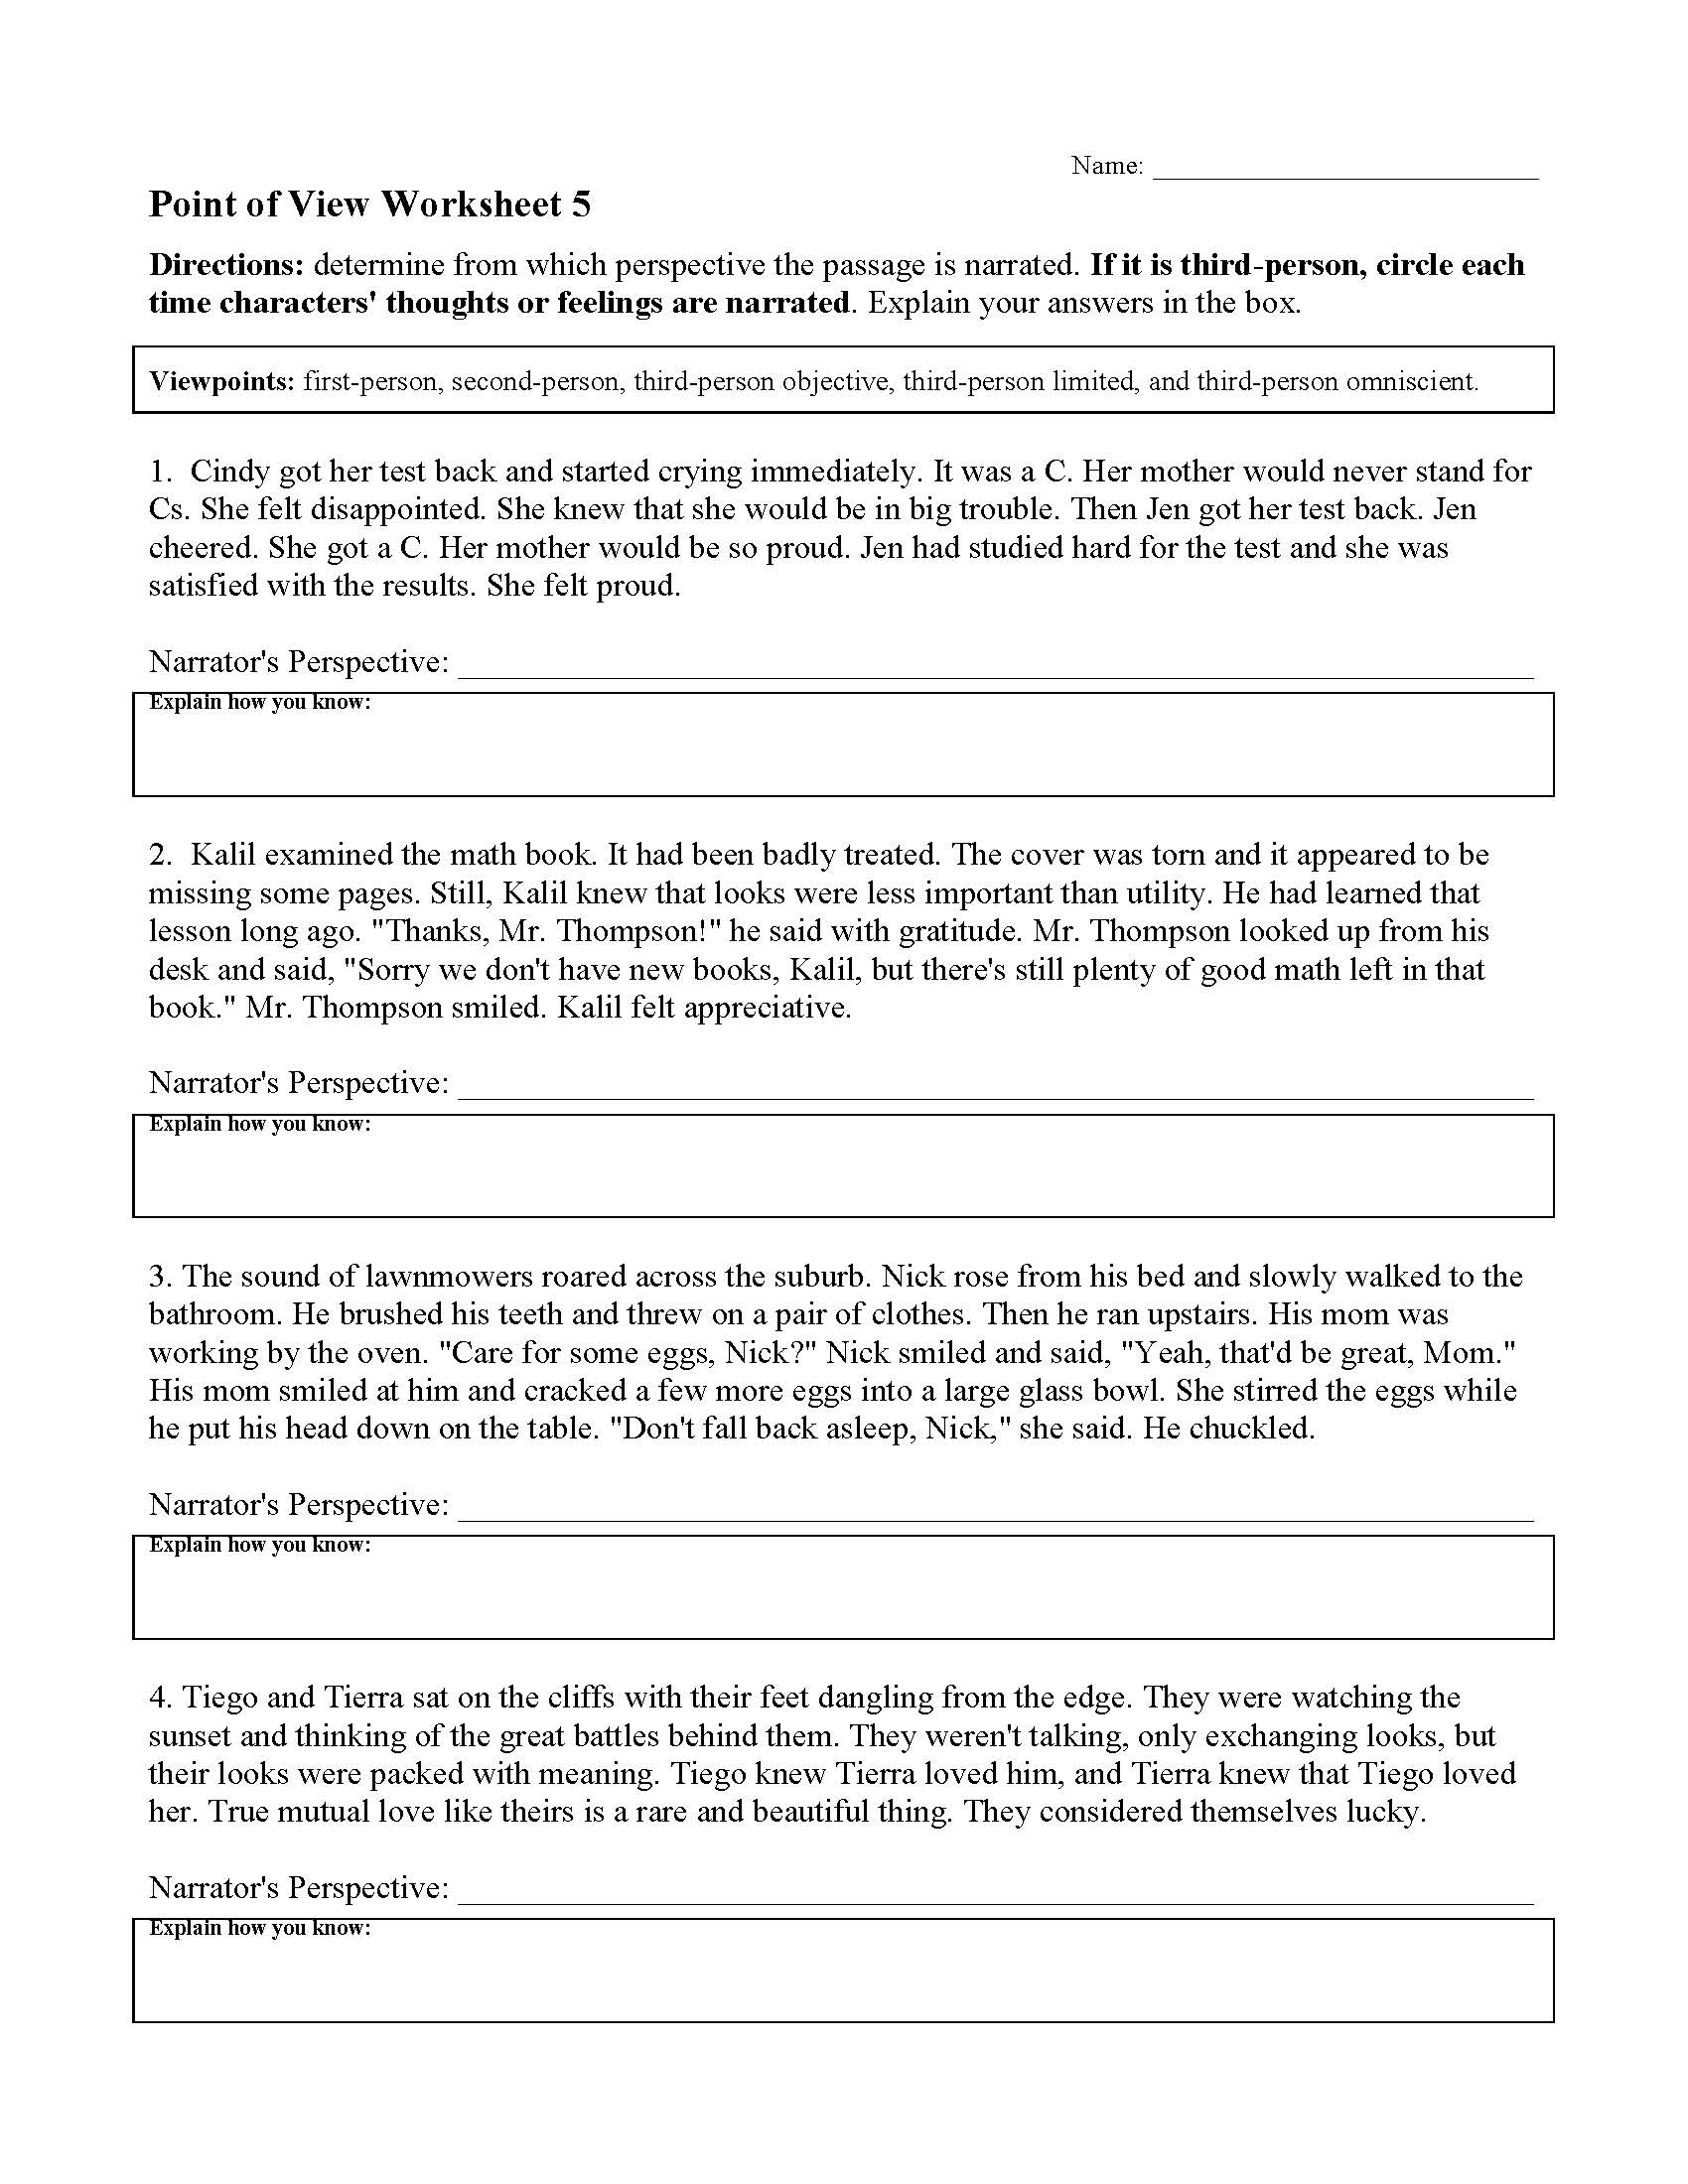 5th-grade-point-of-view-worksheets